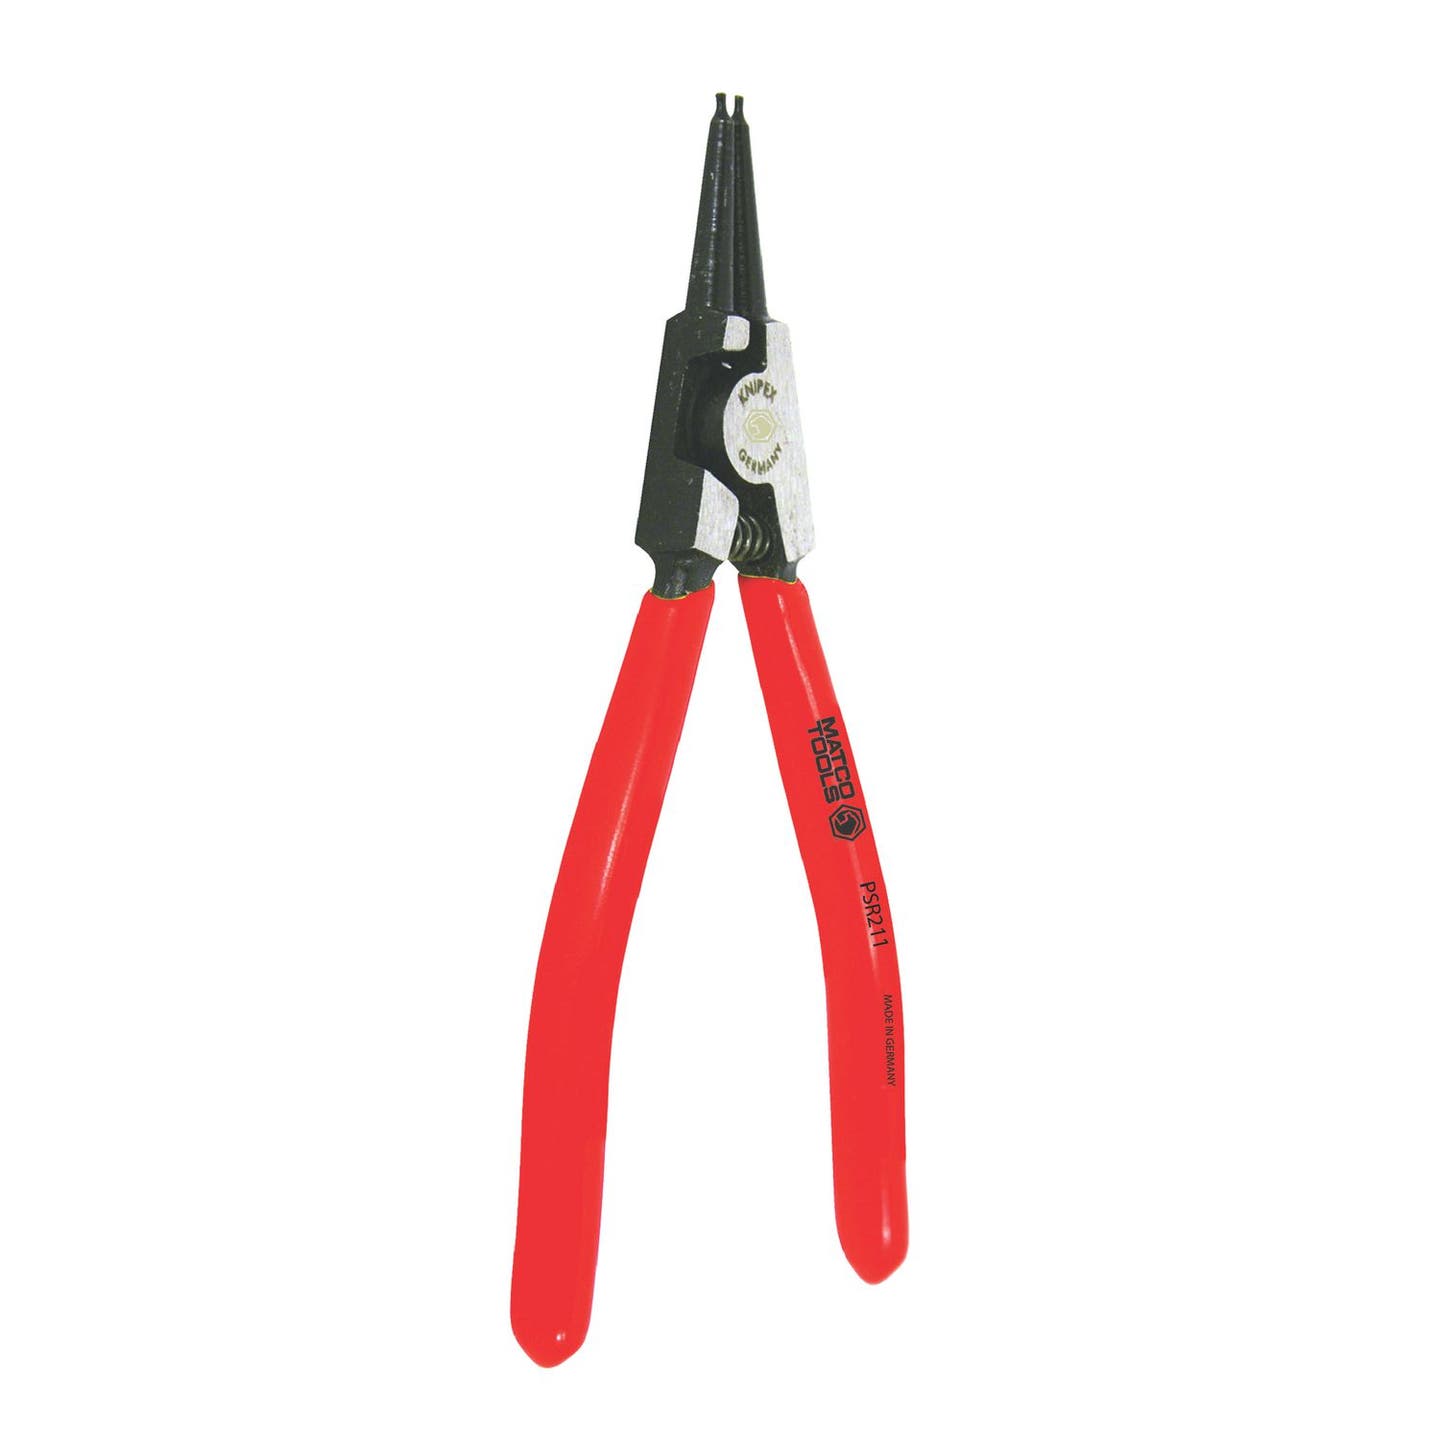 KNIPEX CIRCLIP "SNAP-RING" PLIERS-EXTERNAL STRAIGHT-FORGED TIP-SIZE 1